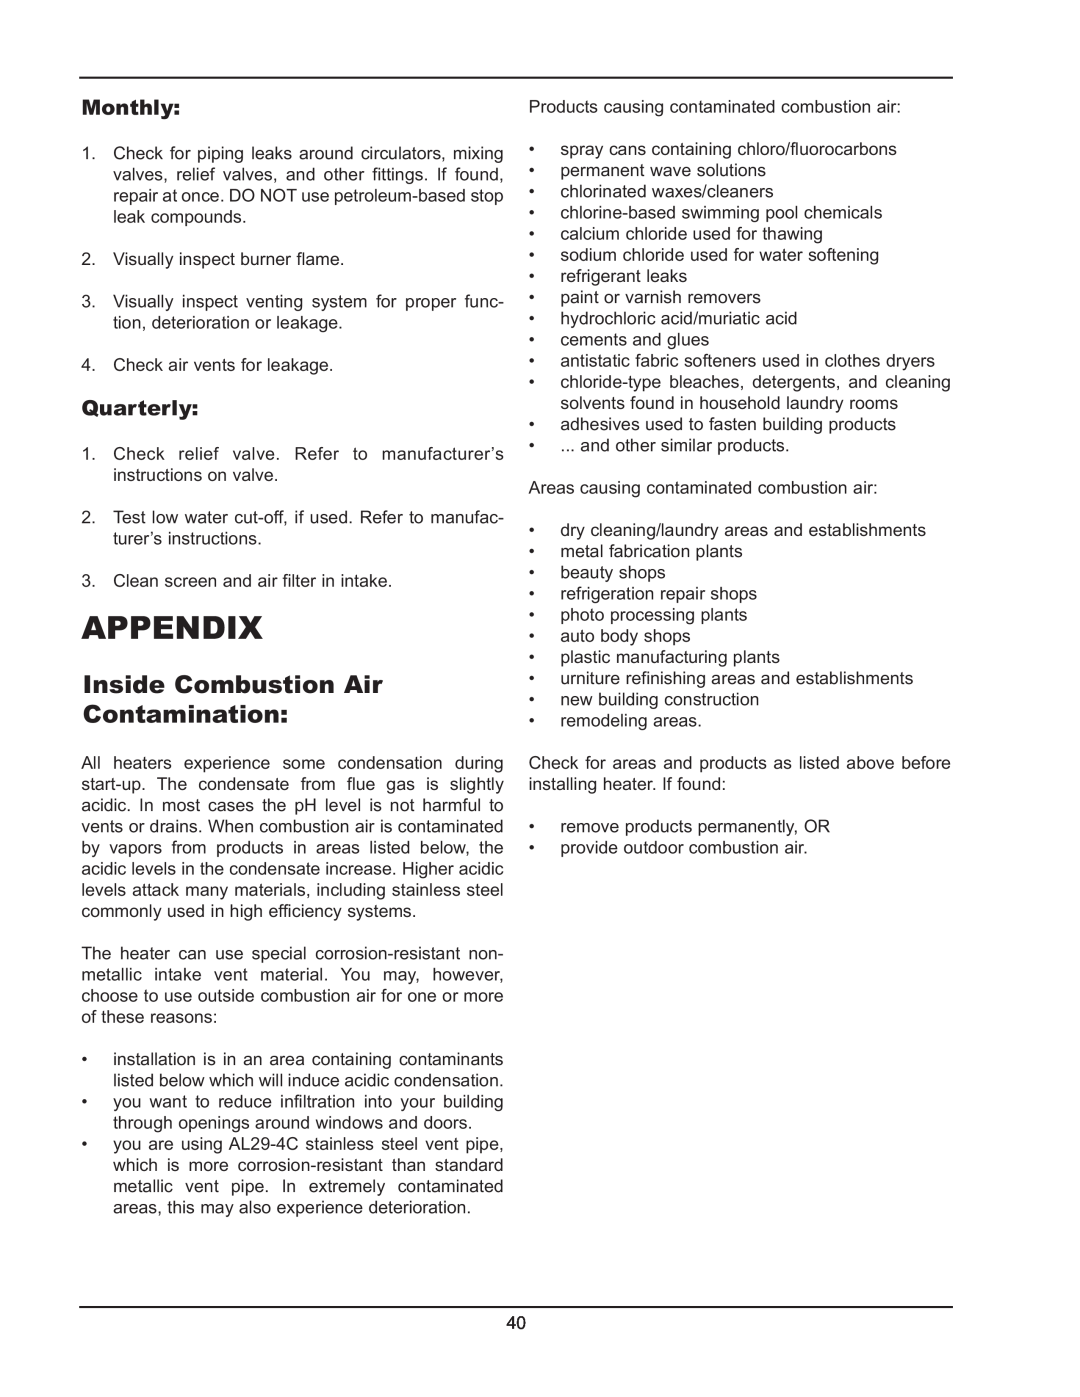 Raypak 122-322 manual Appendix, Inside Combustion Air Contamination, Monthly, Quarterly 